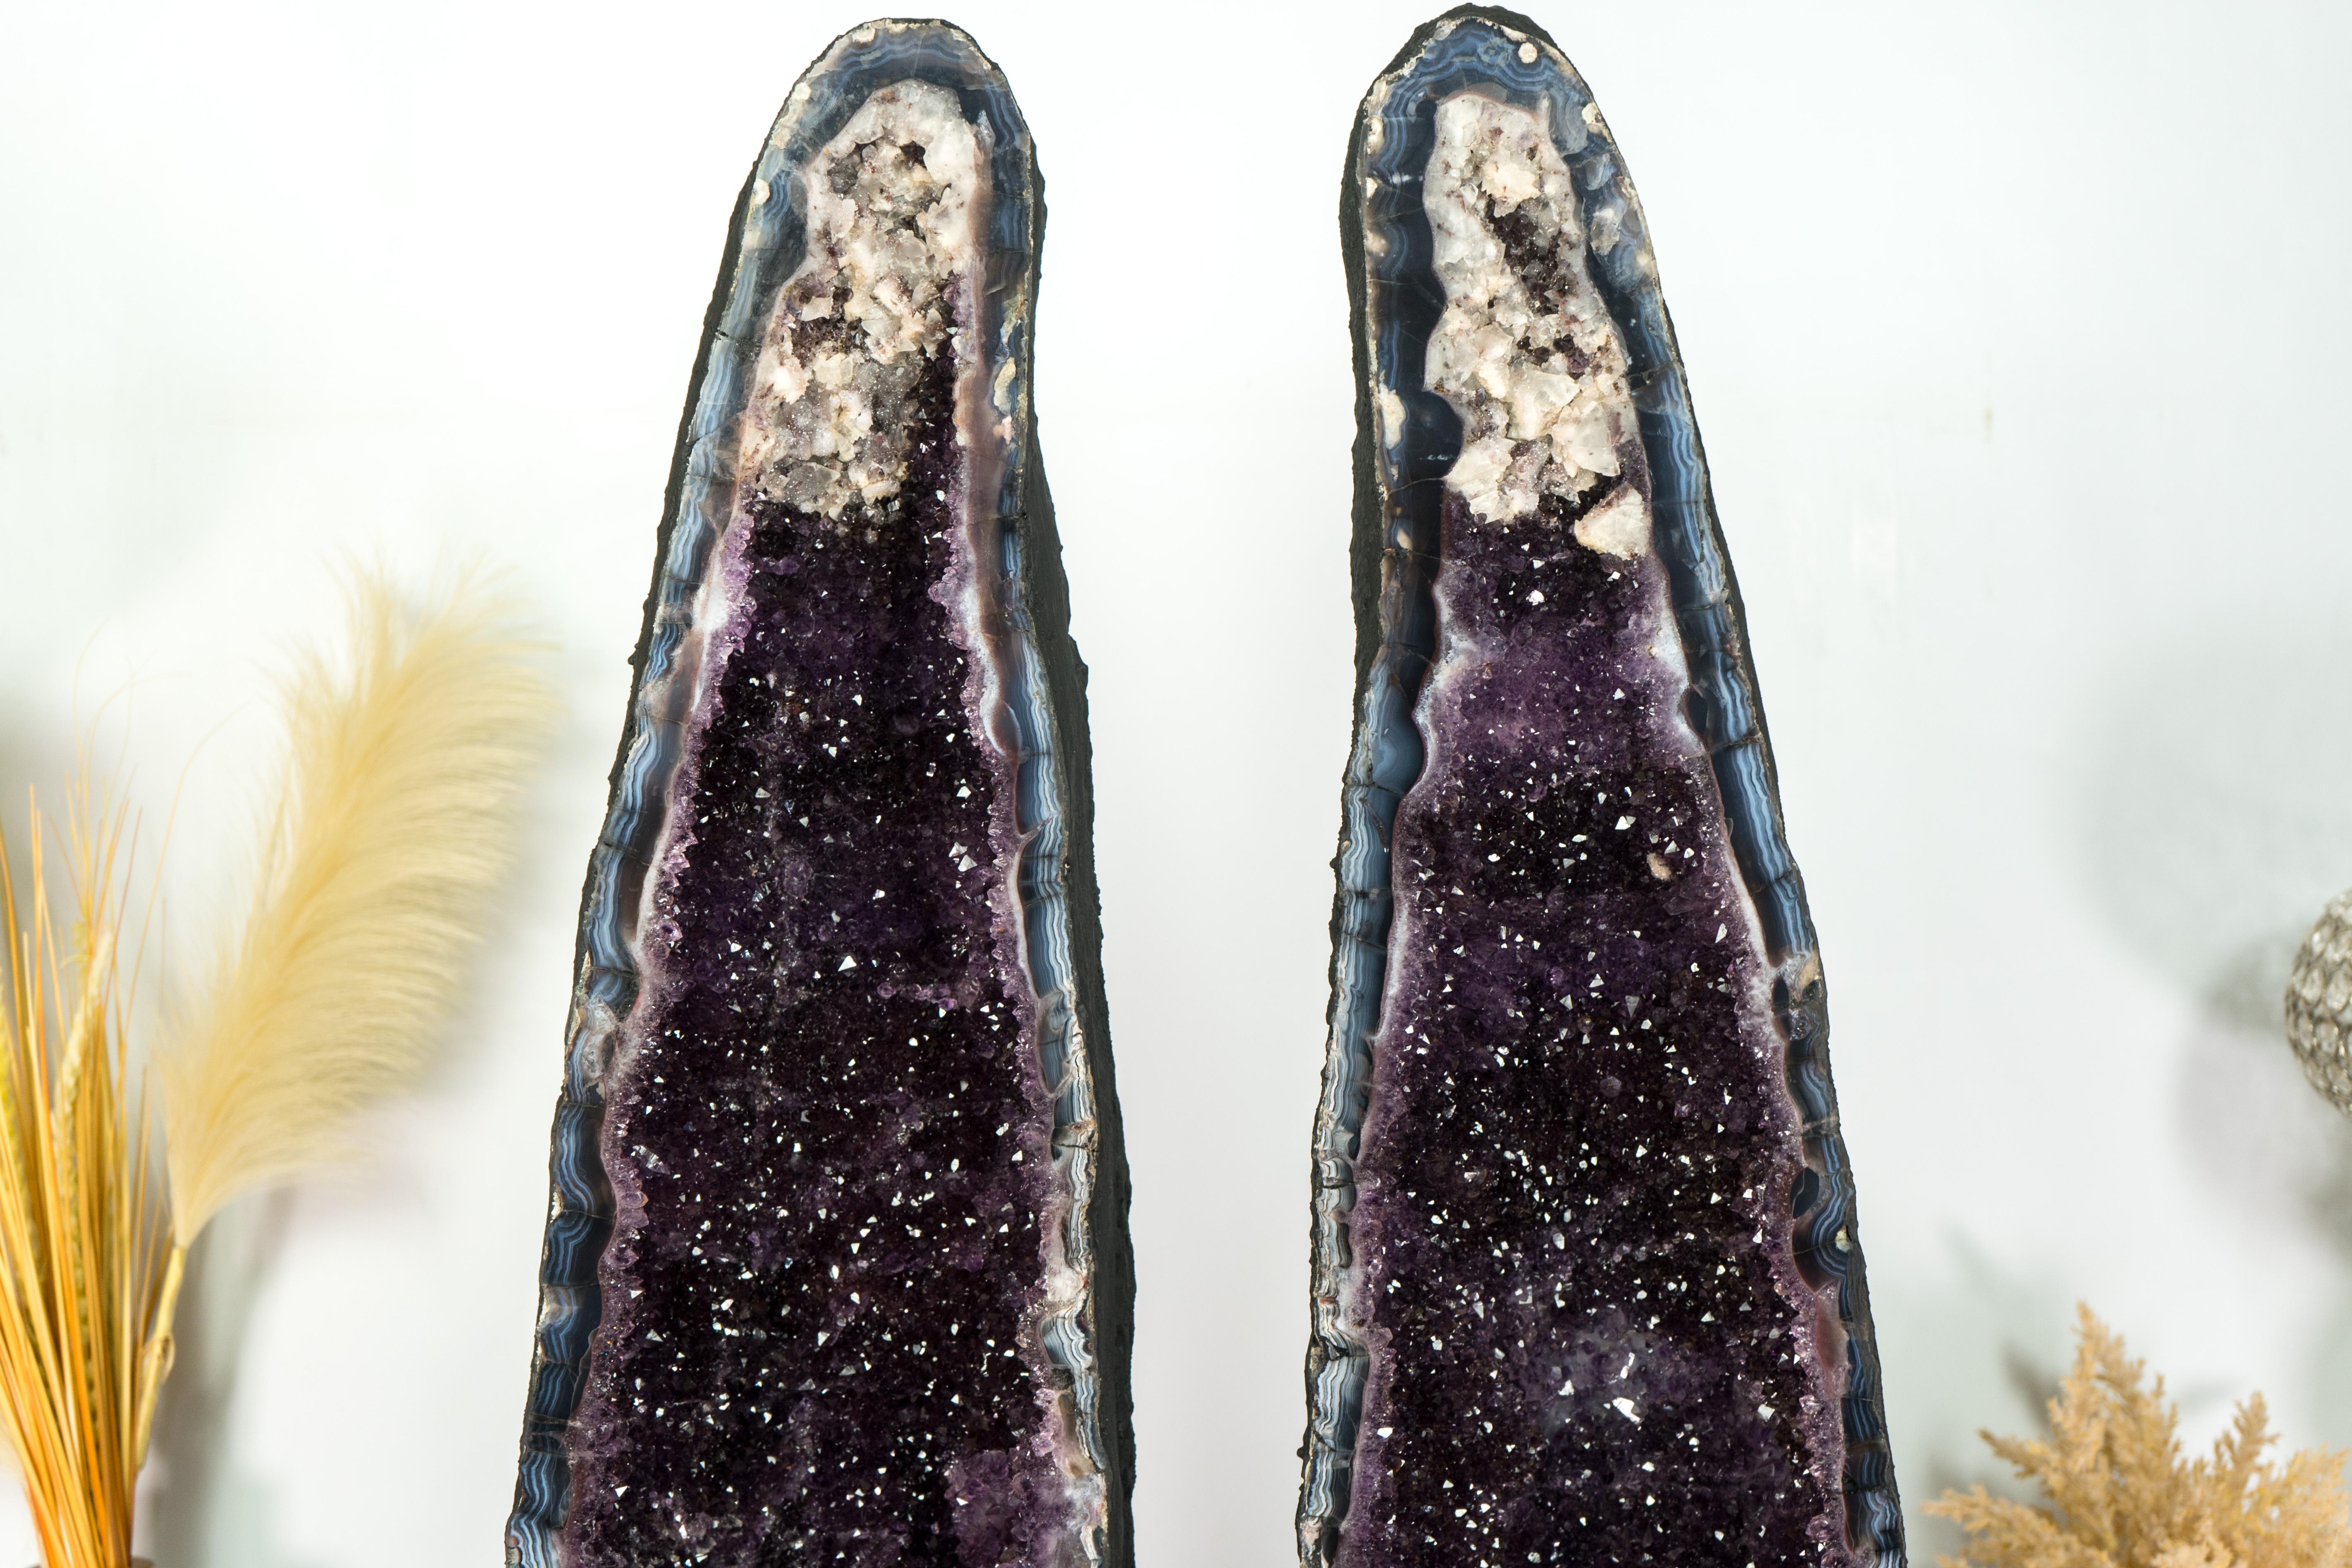 Pair of Amethyst Cathedral Geodes, with Lace Agate, Purple Amethyst, and Calcite For Sale 7